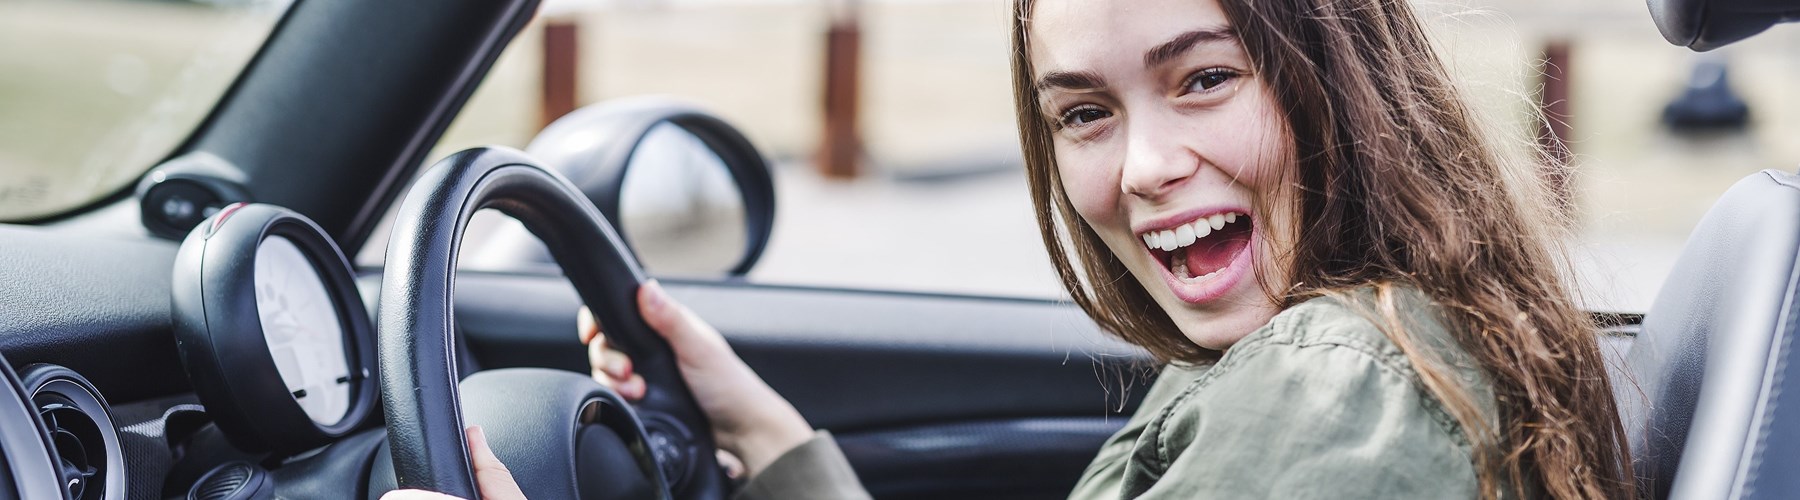 Young woman smiling in car